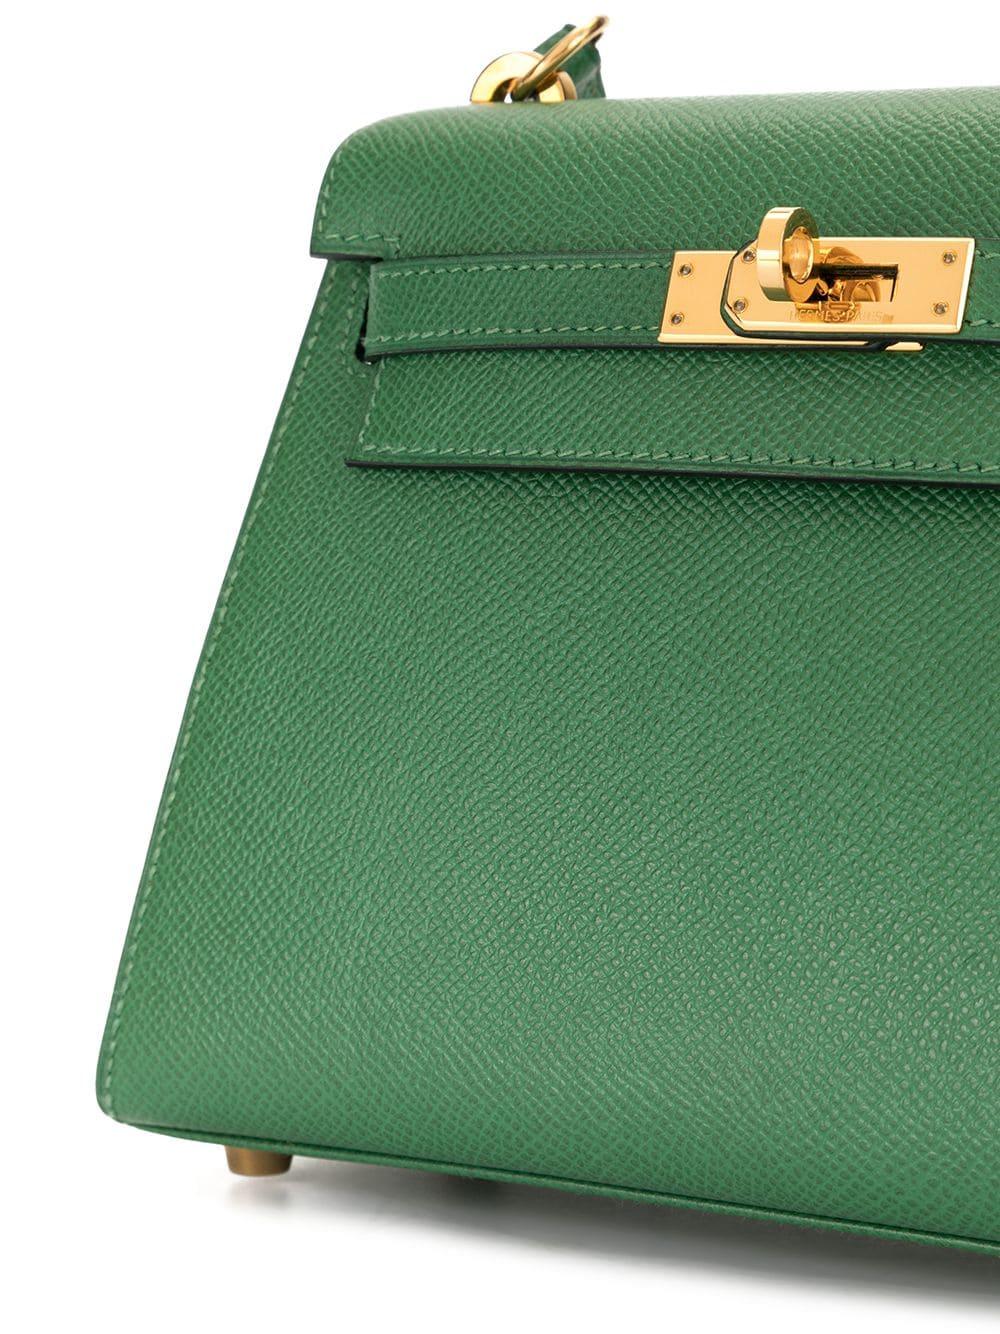 Hermès - Authenticated Kelly Mini Handbag - Leather Green Plain for Women, Very Good Condition